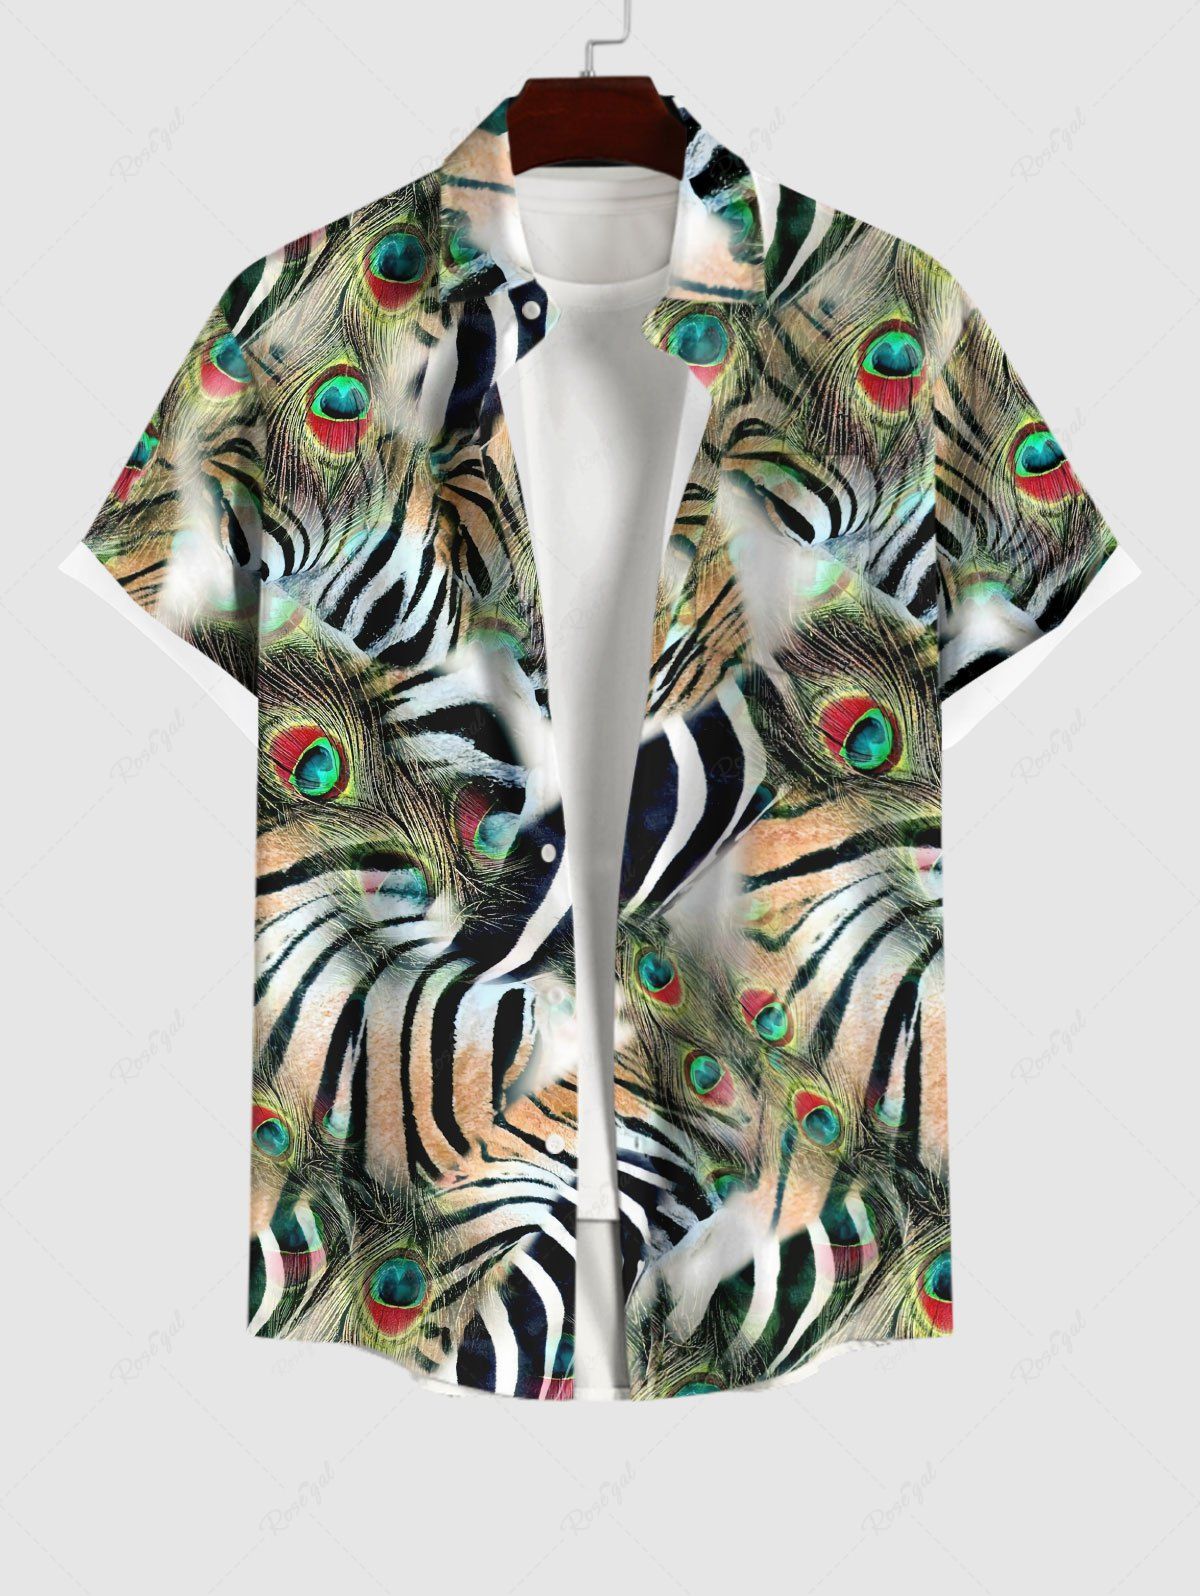 Fancy Hawaii Plus Size Turn-down Collar Peacock Feather Tiger Zebra Striped Print Button Pocket Shirt For Men  